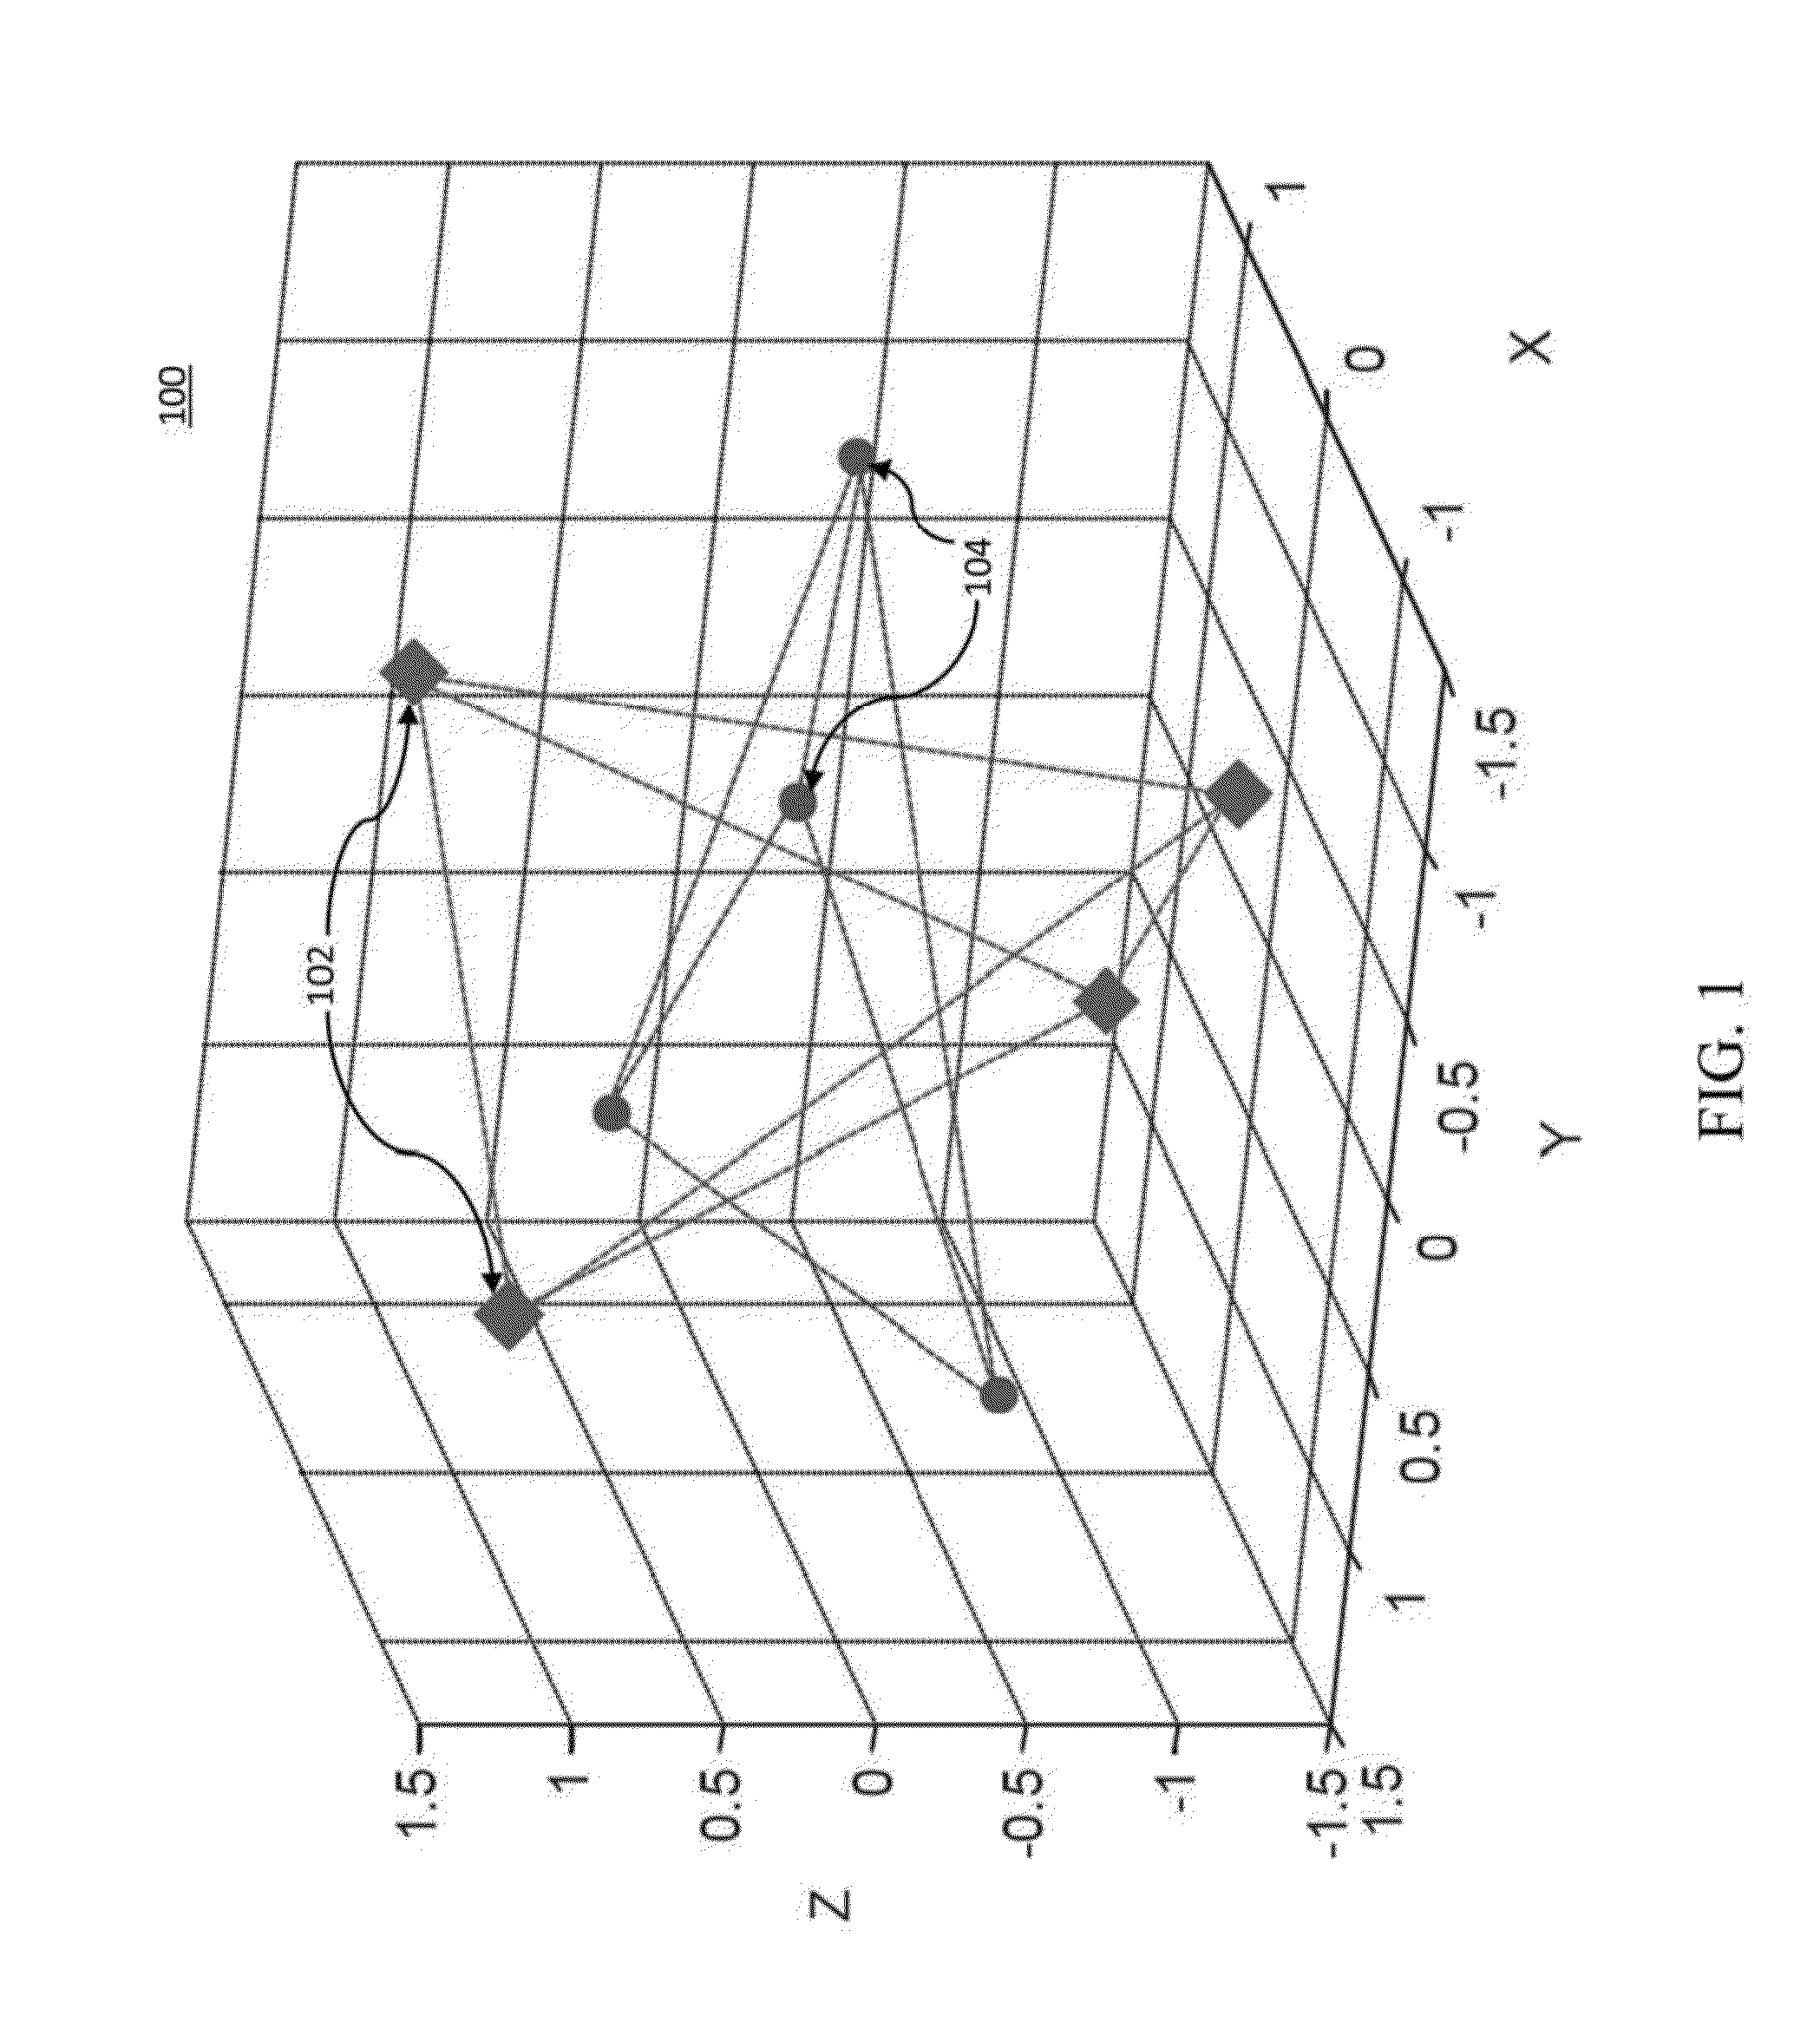 Multidimensional coded-modulation for high-speed optical transport over few-mode fibers